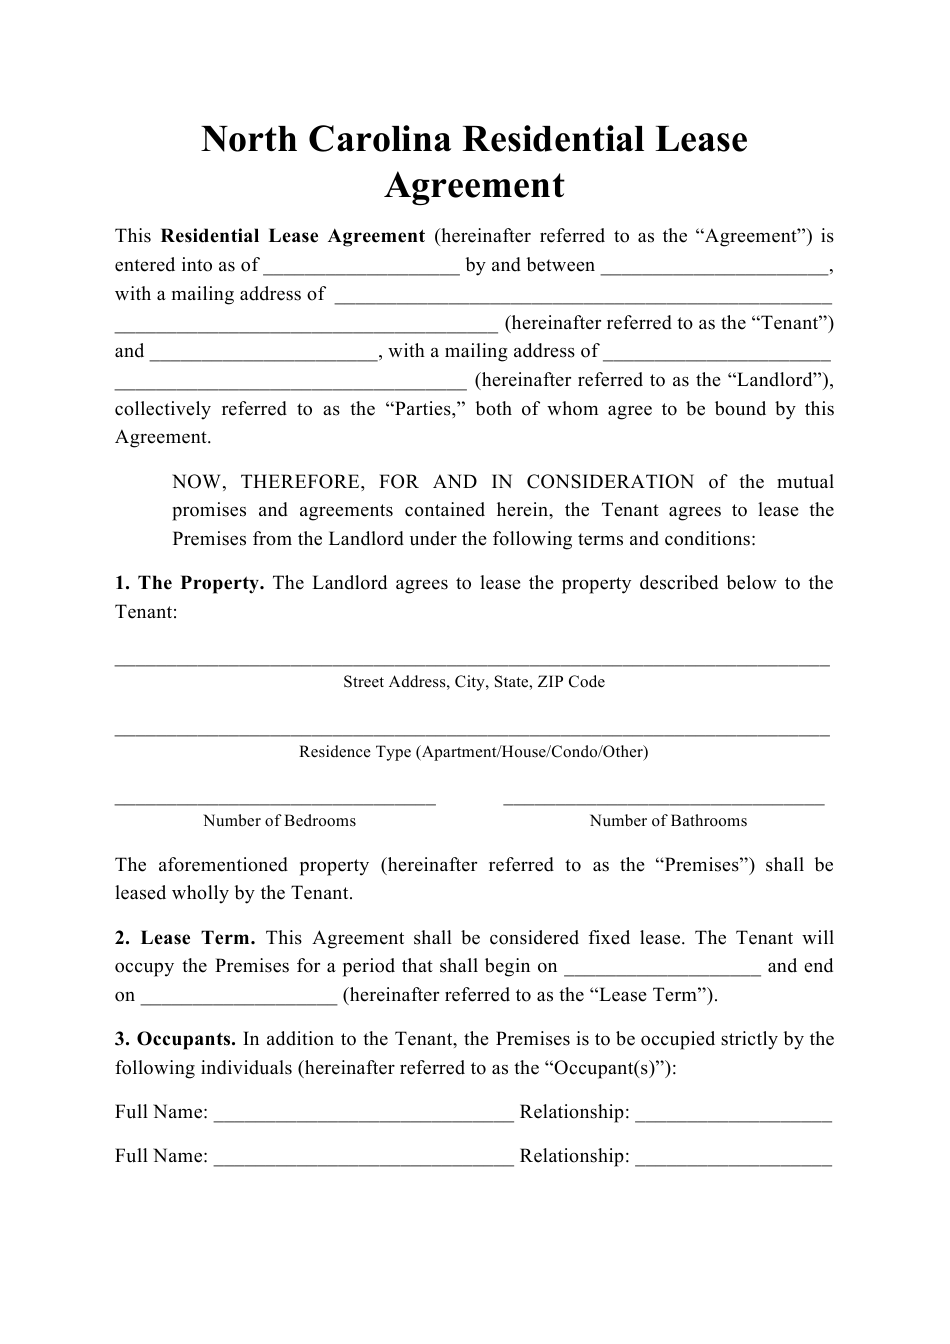 North Carolina Residential Lease Agreement Create Download Free North 